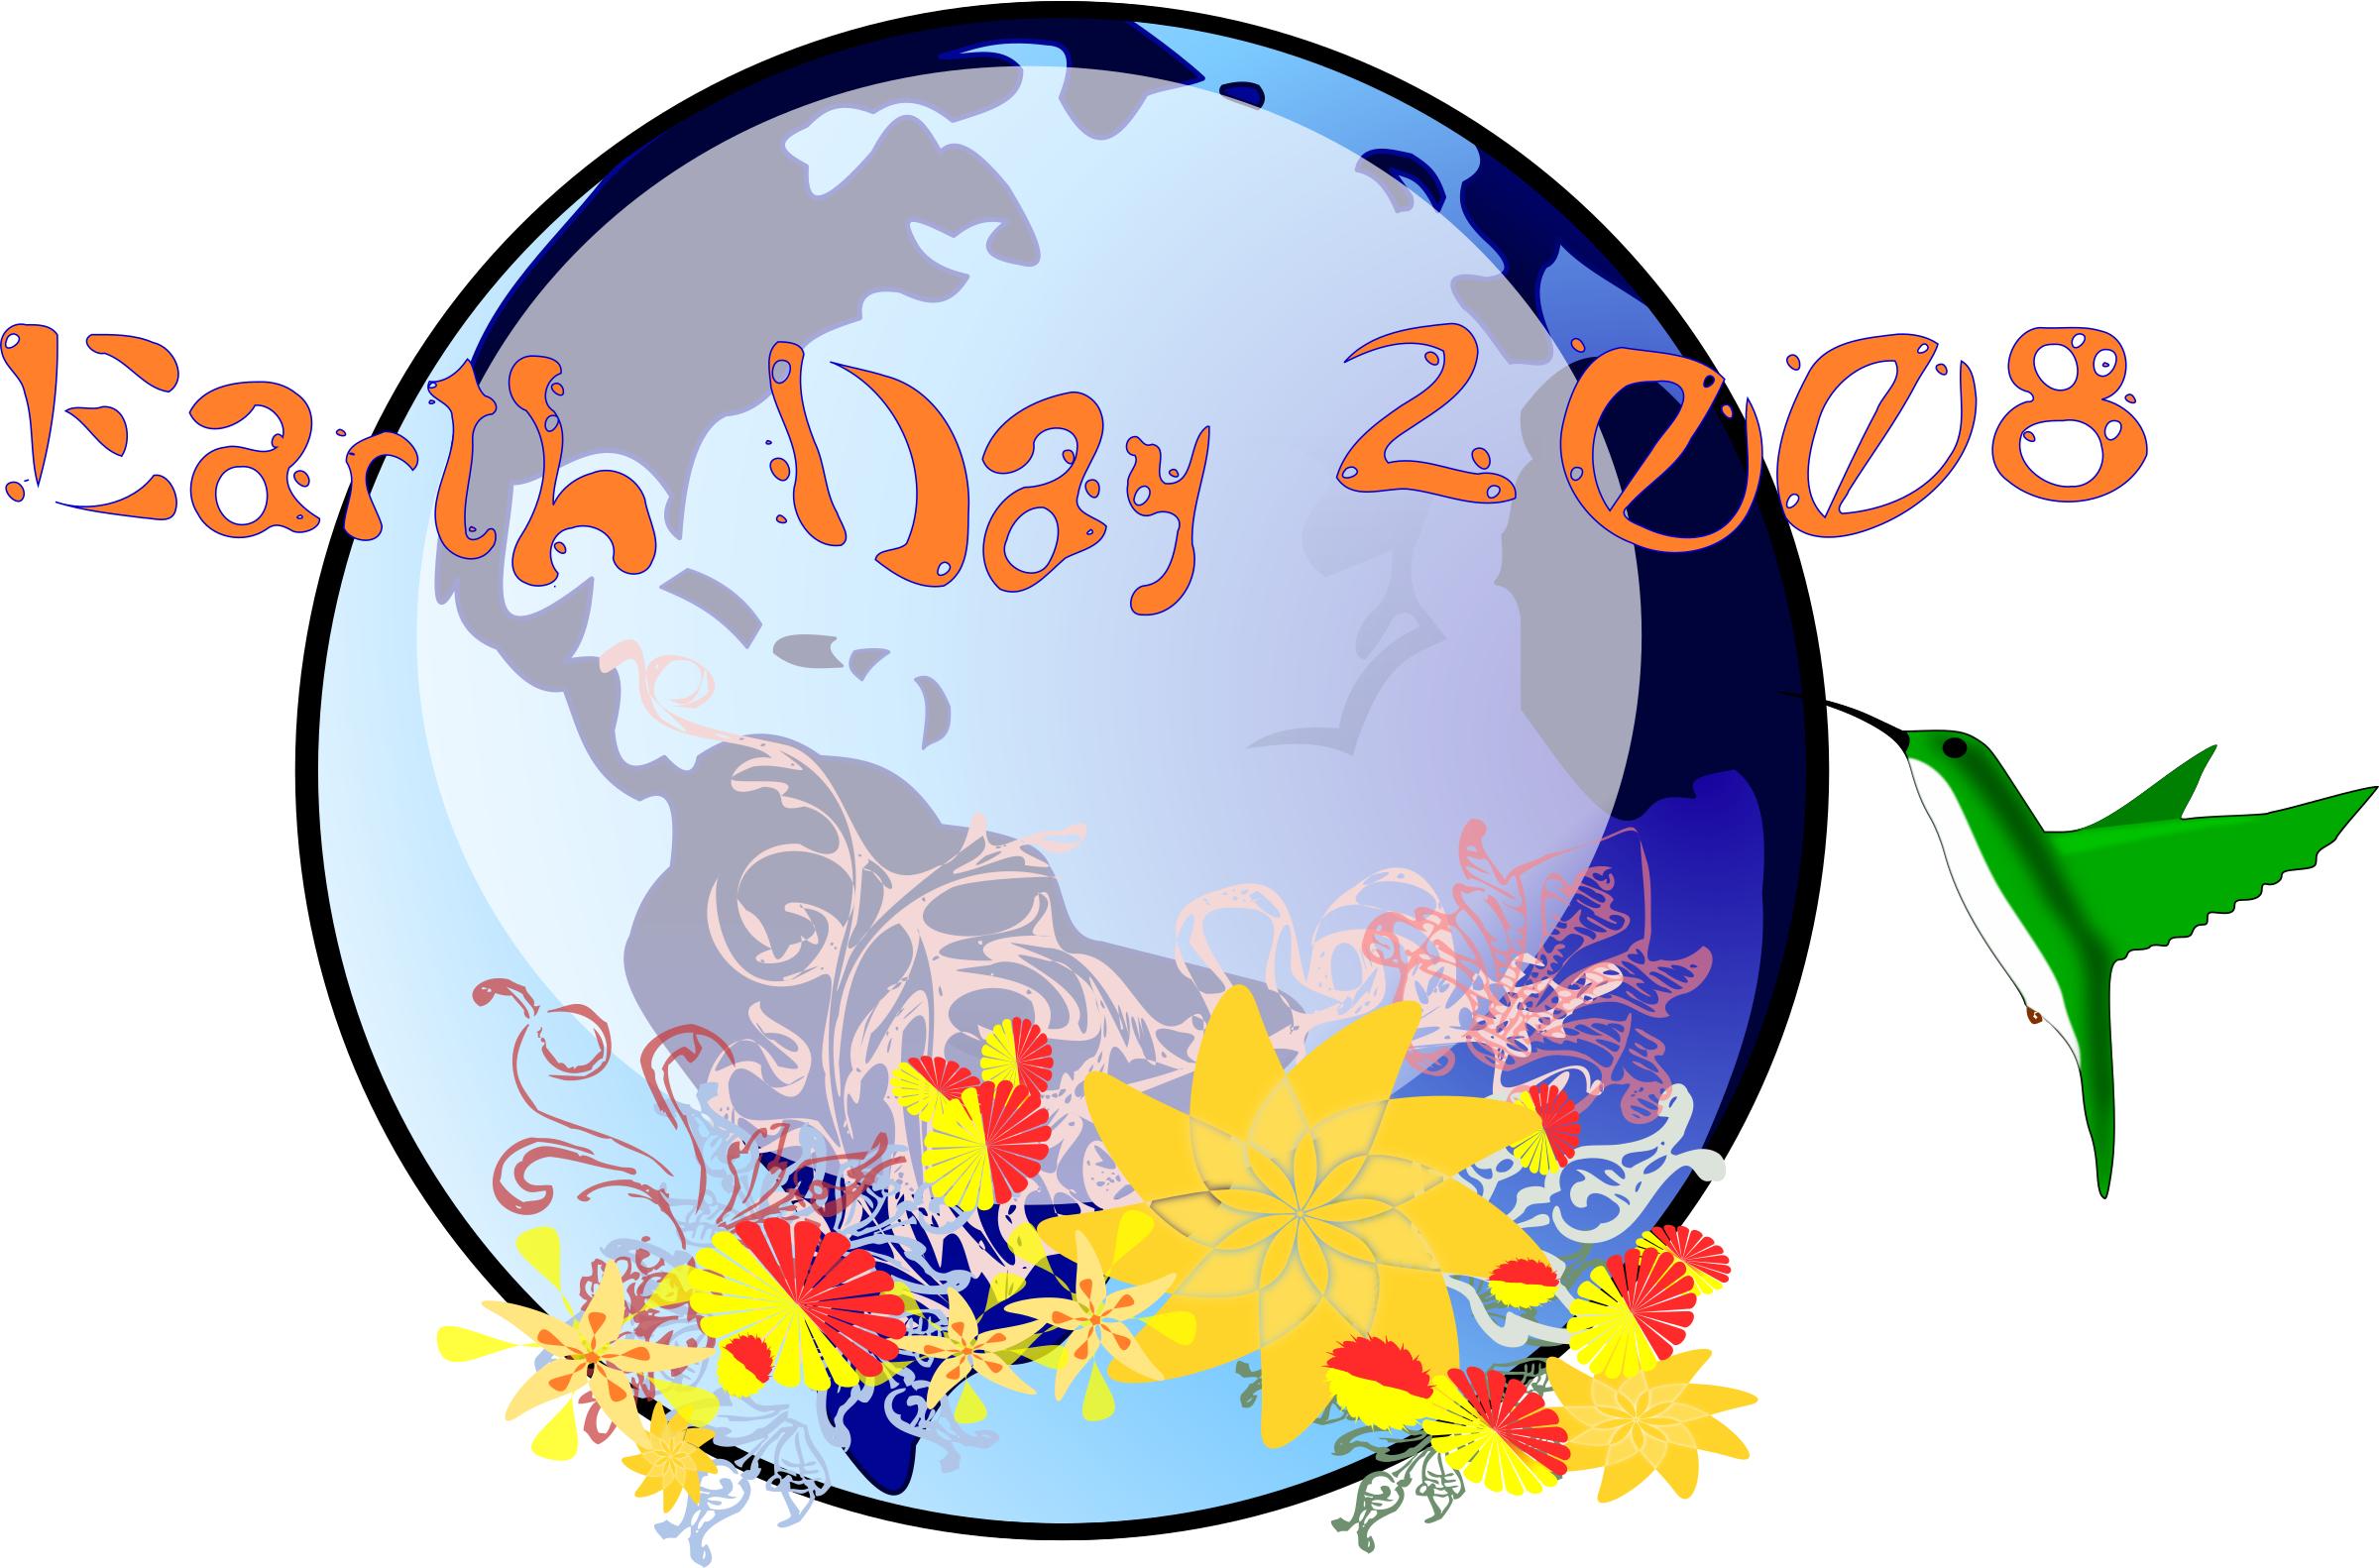 earth day 2008 png